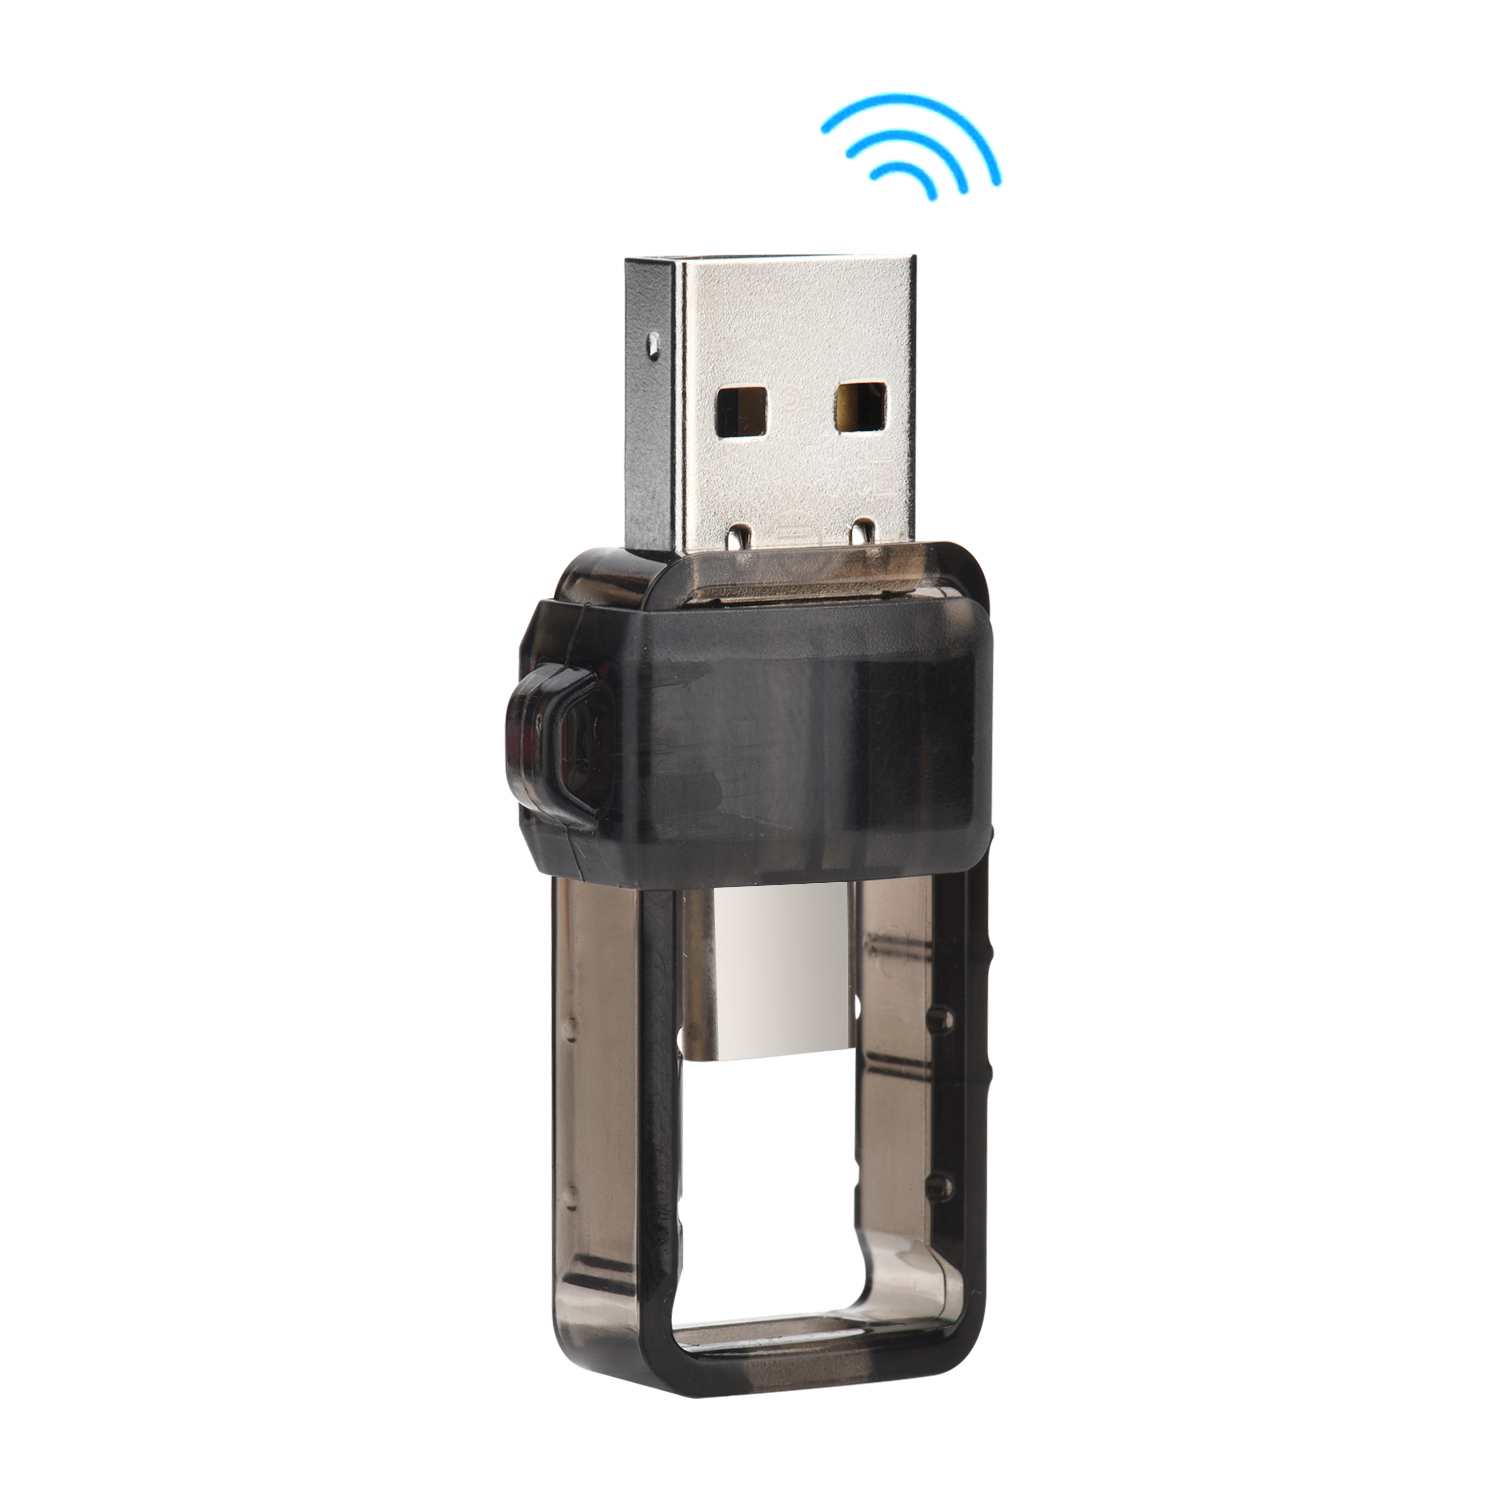 BT408 2 in 1 Usb 4.0 Bluetooth Dongle Adapter Usb to Type-C